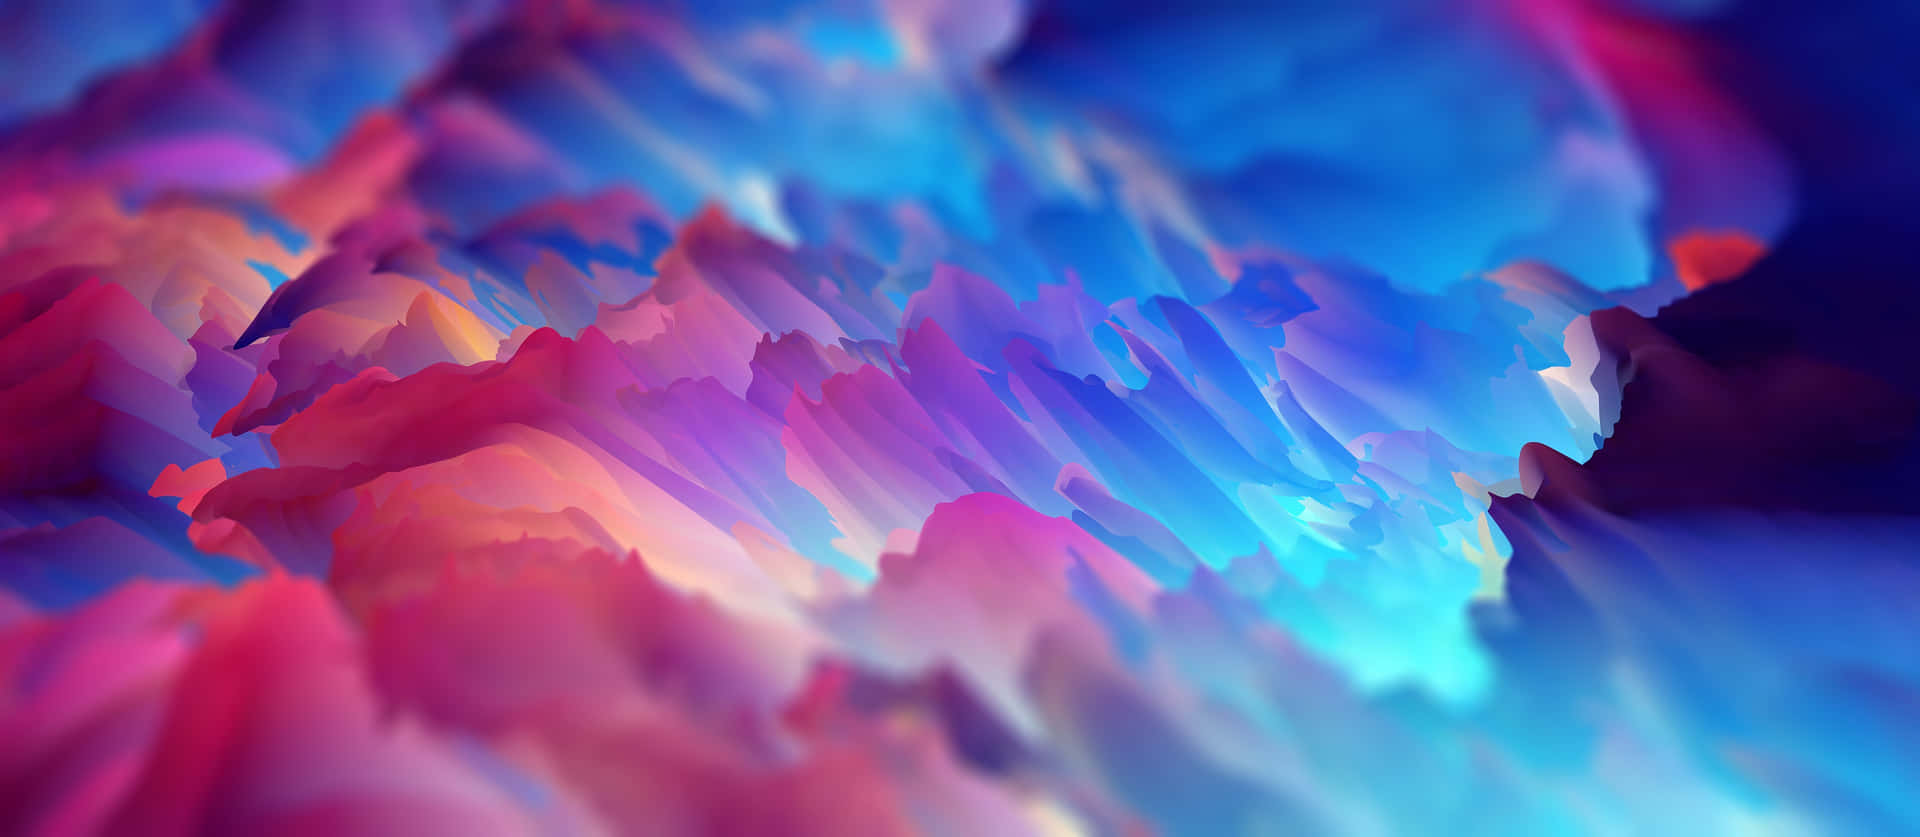 Exquisite Fusion Of Pink And Blue In Abstract Background